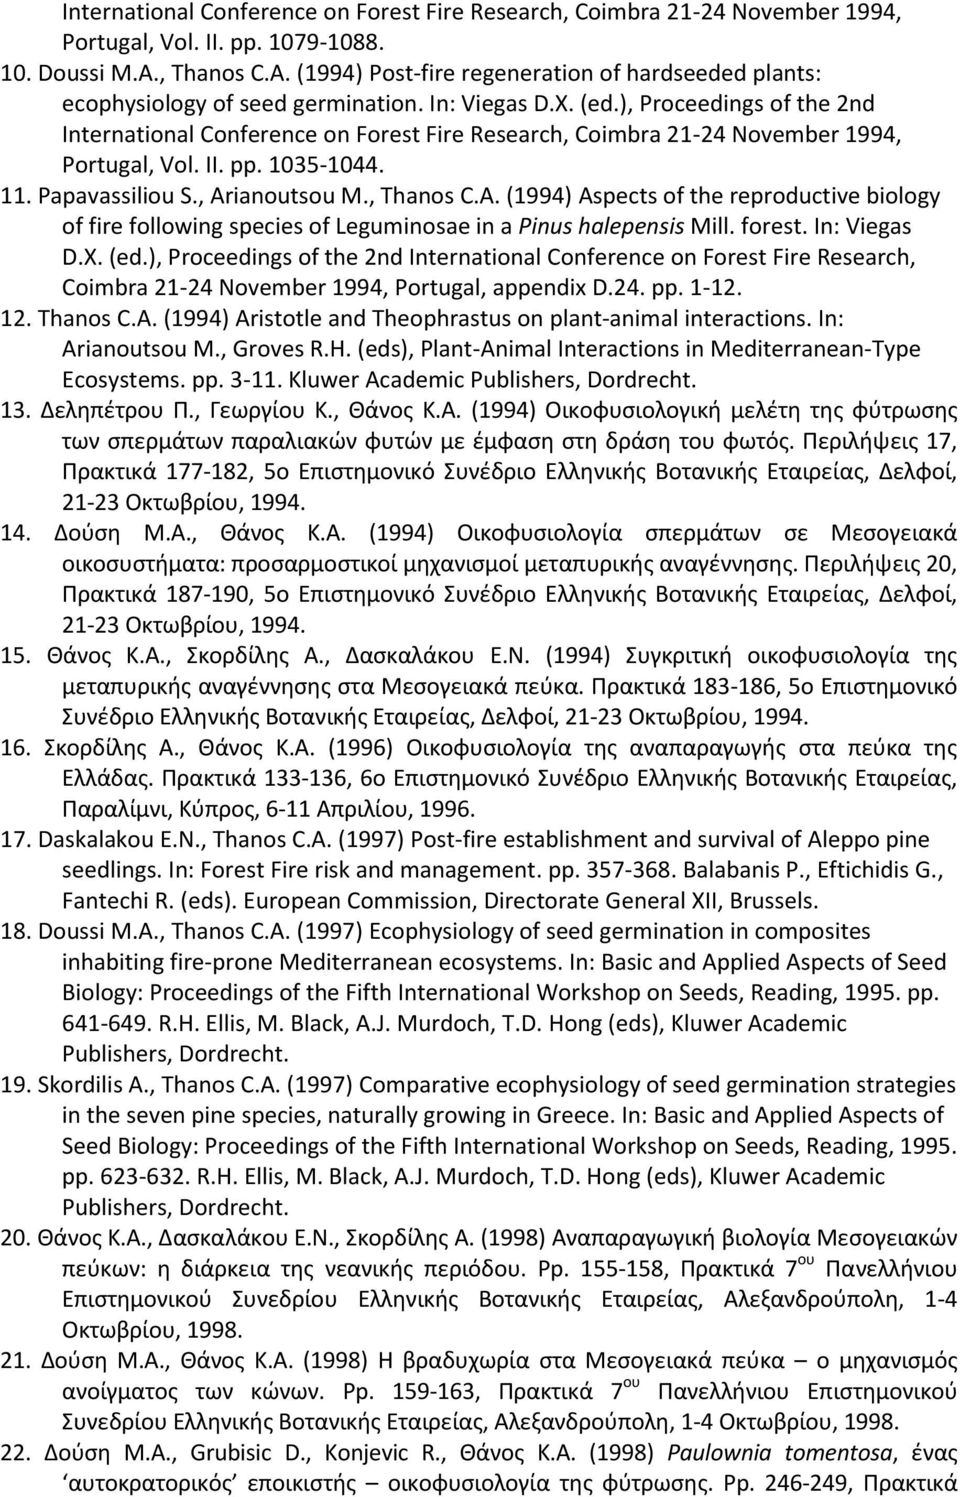 ), Proceedings of the 2nd International Conference on Forest Fire Research, Coimbra 21-24 November 1994, Portugal, Vol. II. pp. 1035-1044. 11. Papavassiliou S., Ar